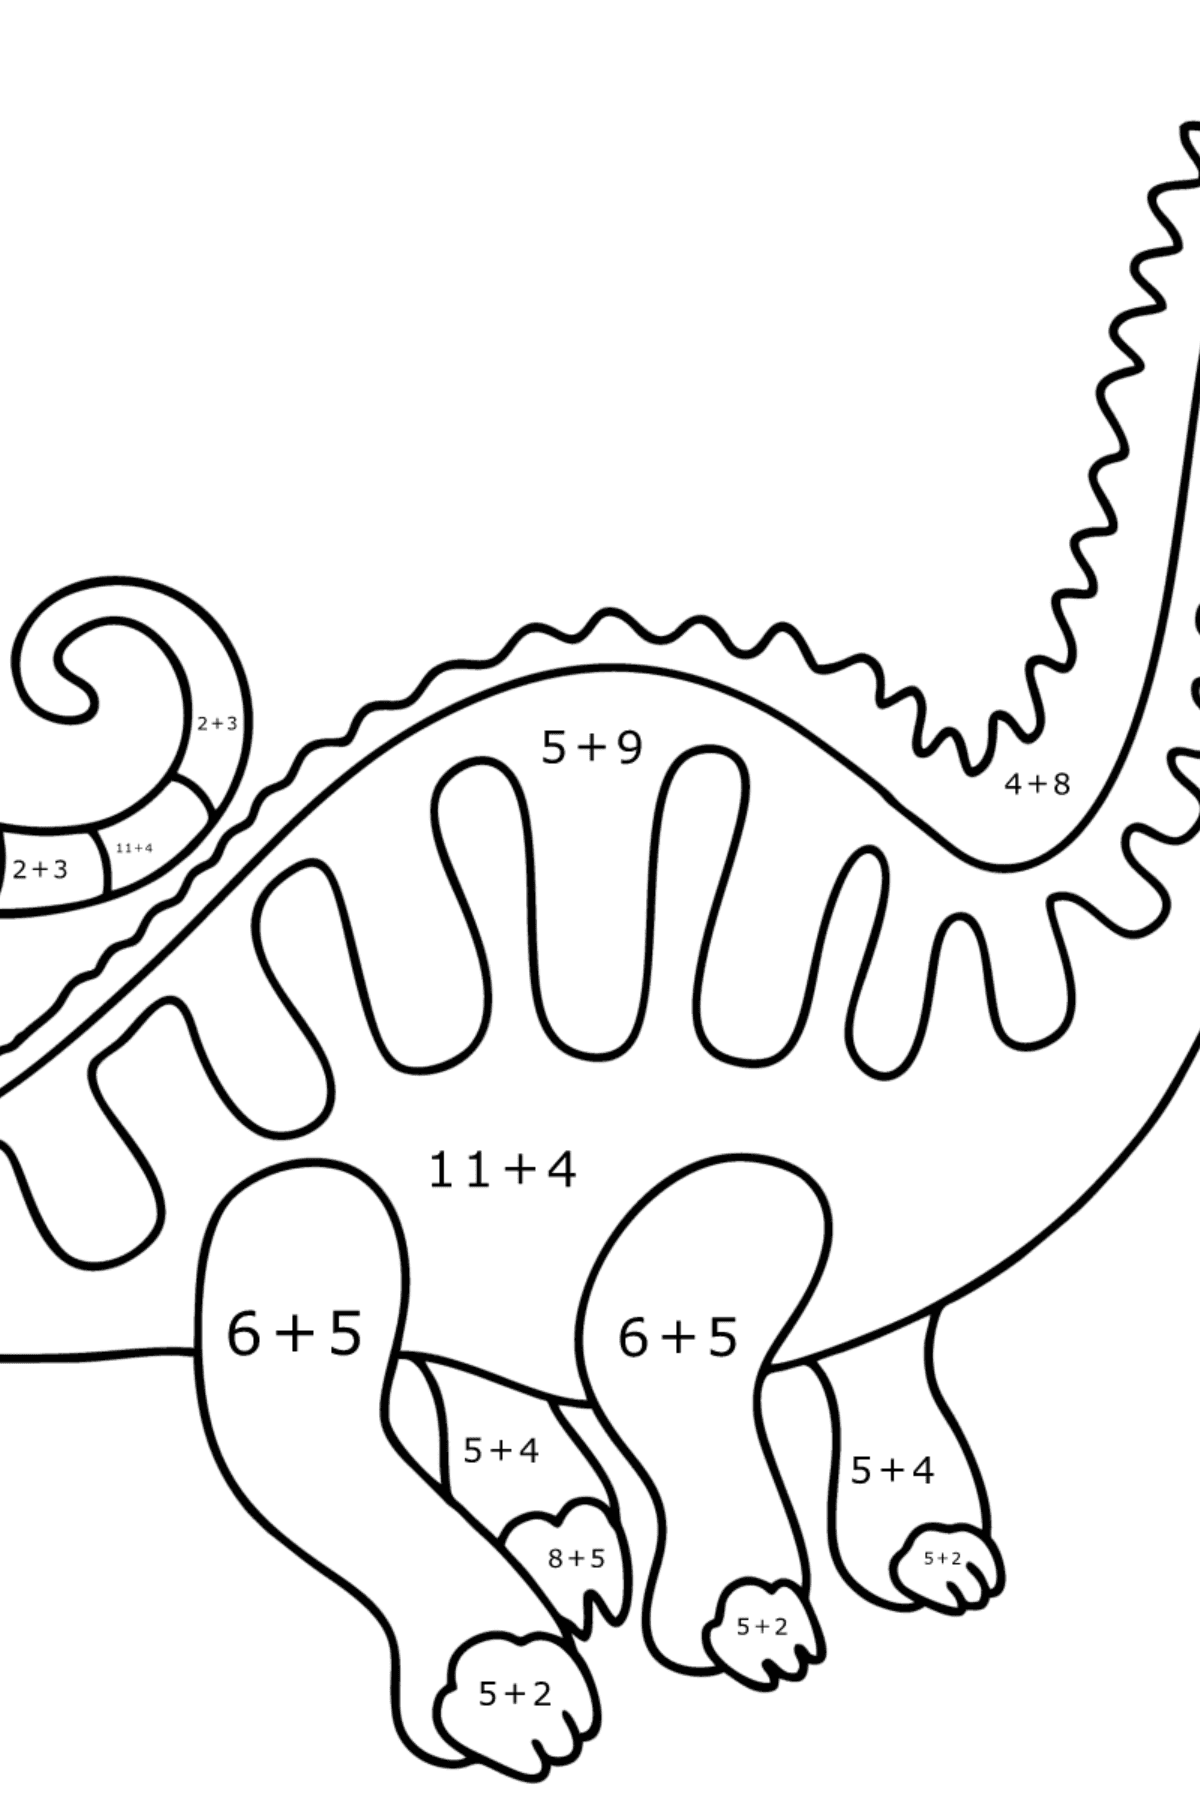 Apatosaurus coloring page - Math Coloring - Addition for Kids